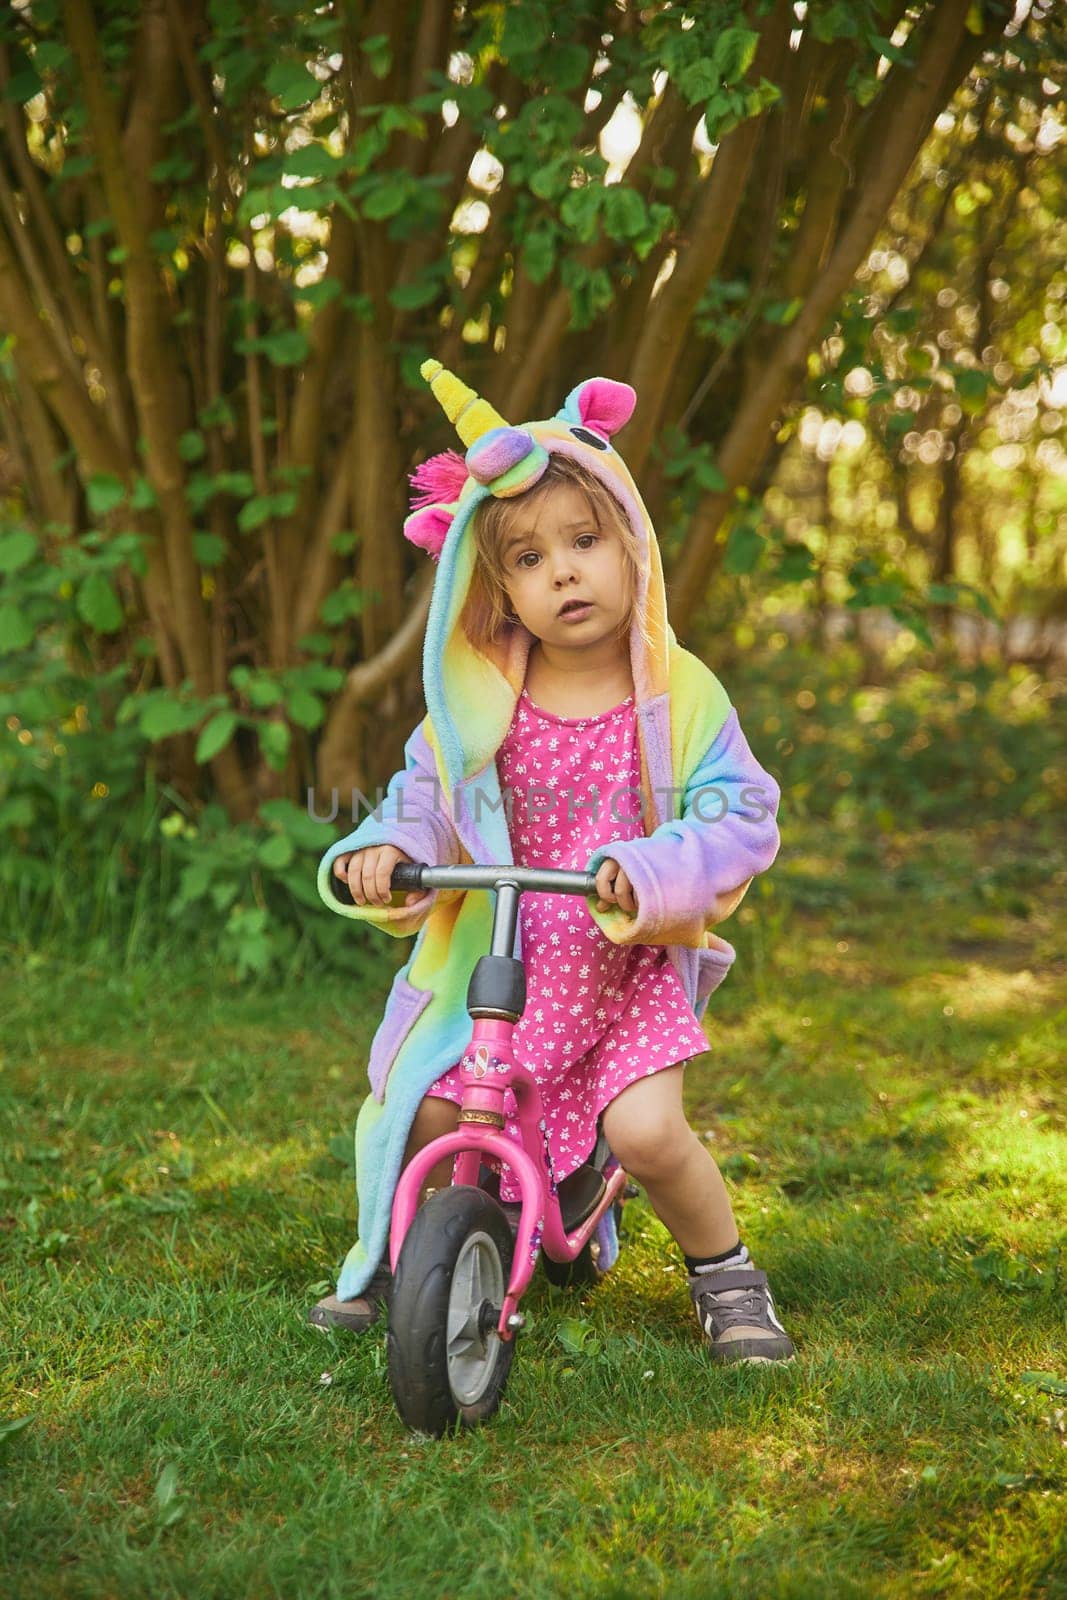 Adorable child riding a bike in the garden by Viktor_Osypenko